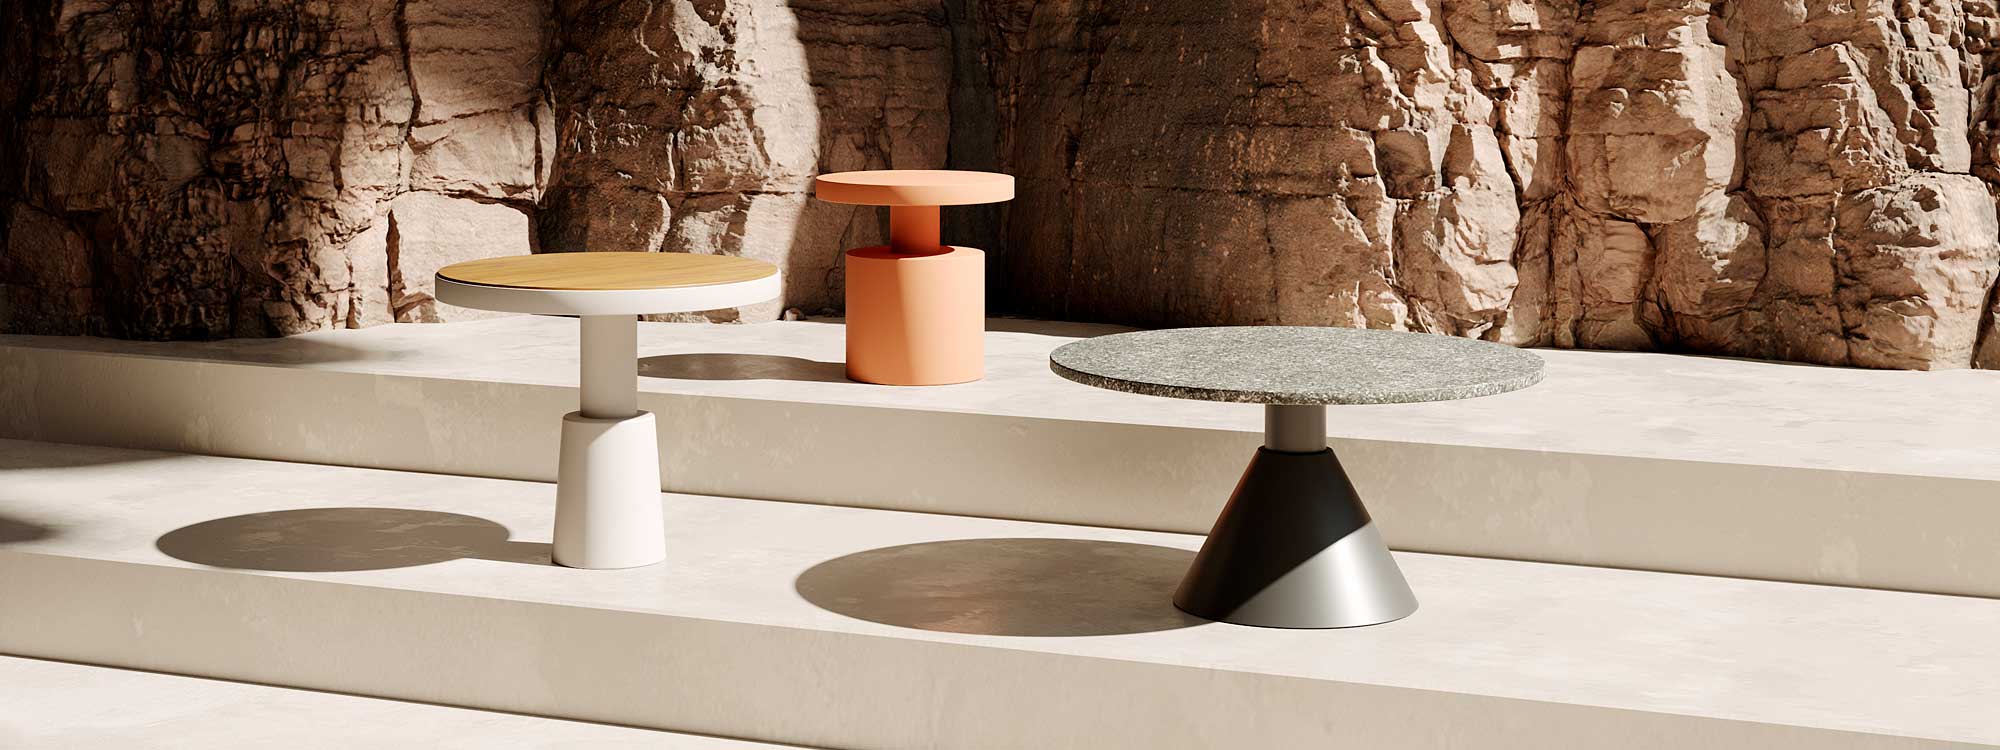 Image showing the 3 different geometric forms of Drums low table base by Oiside